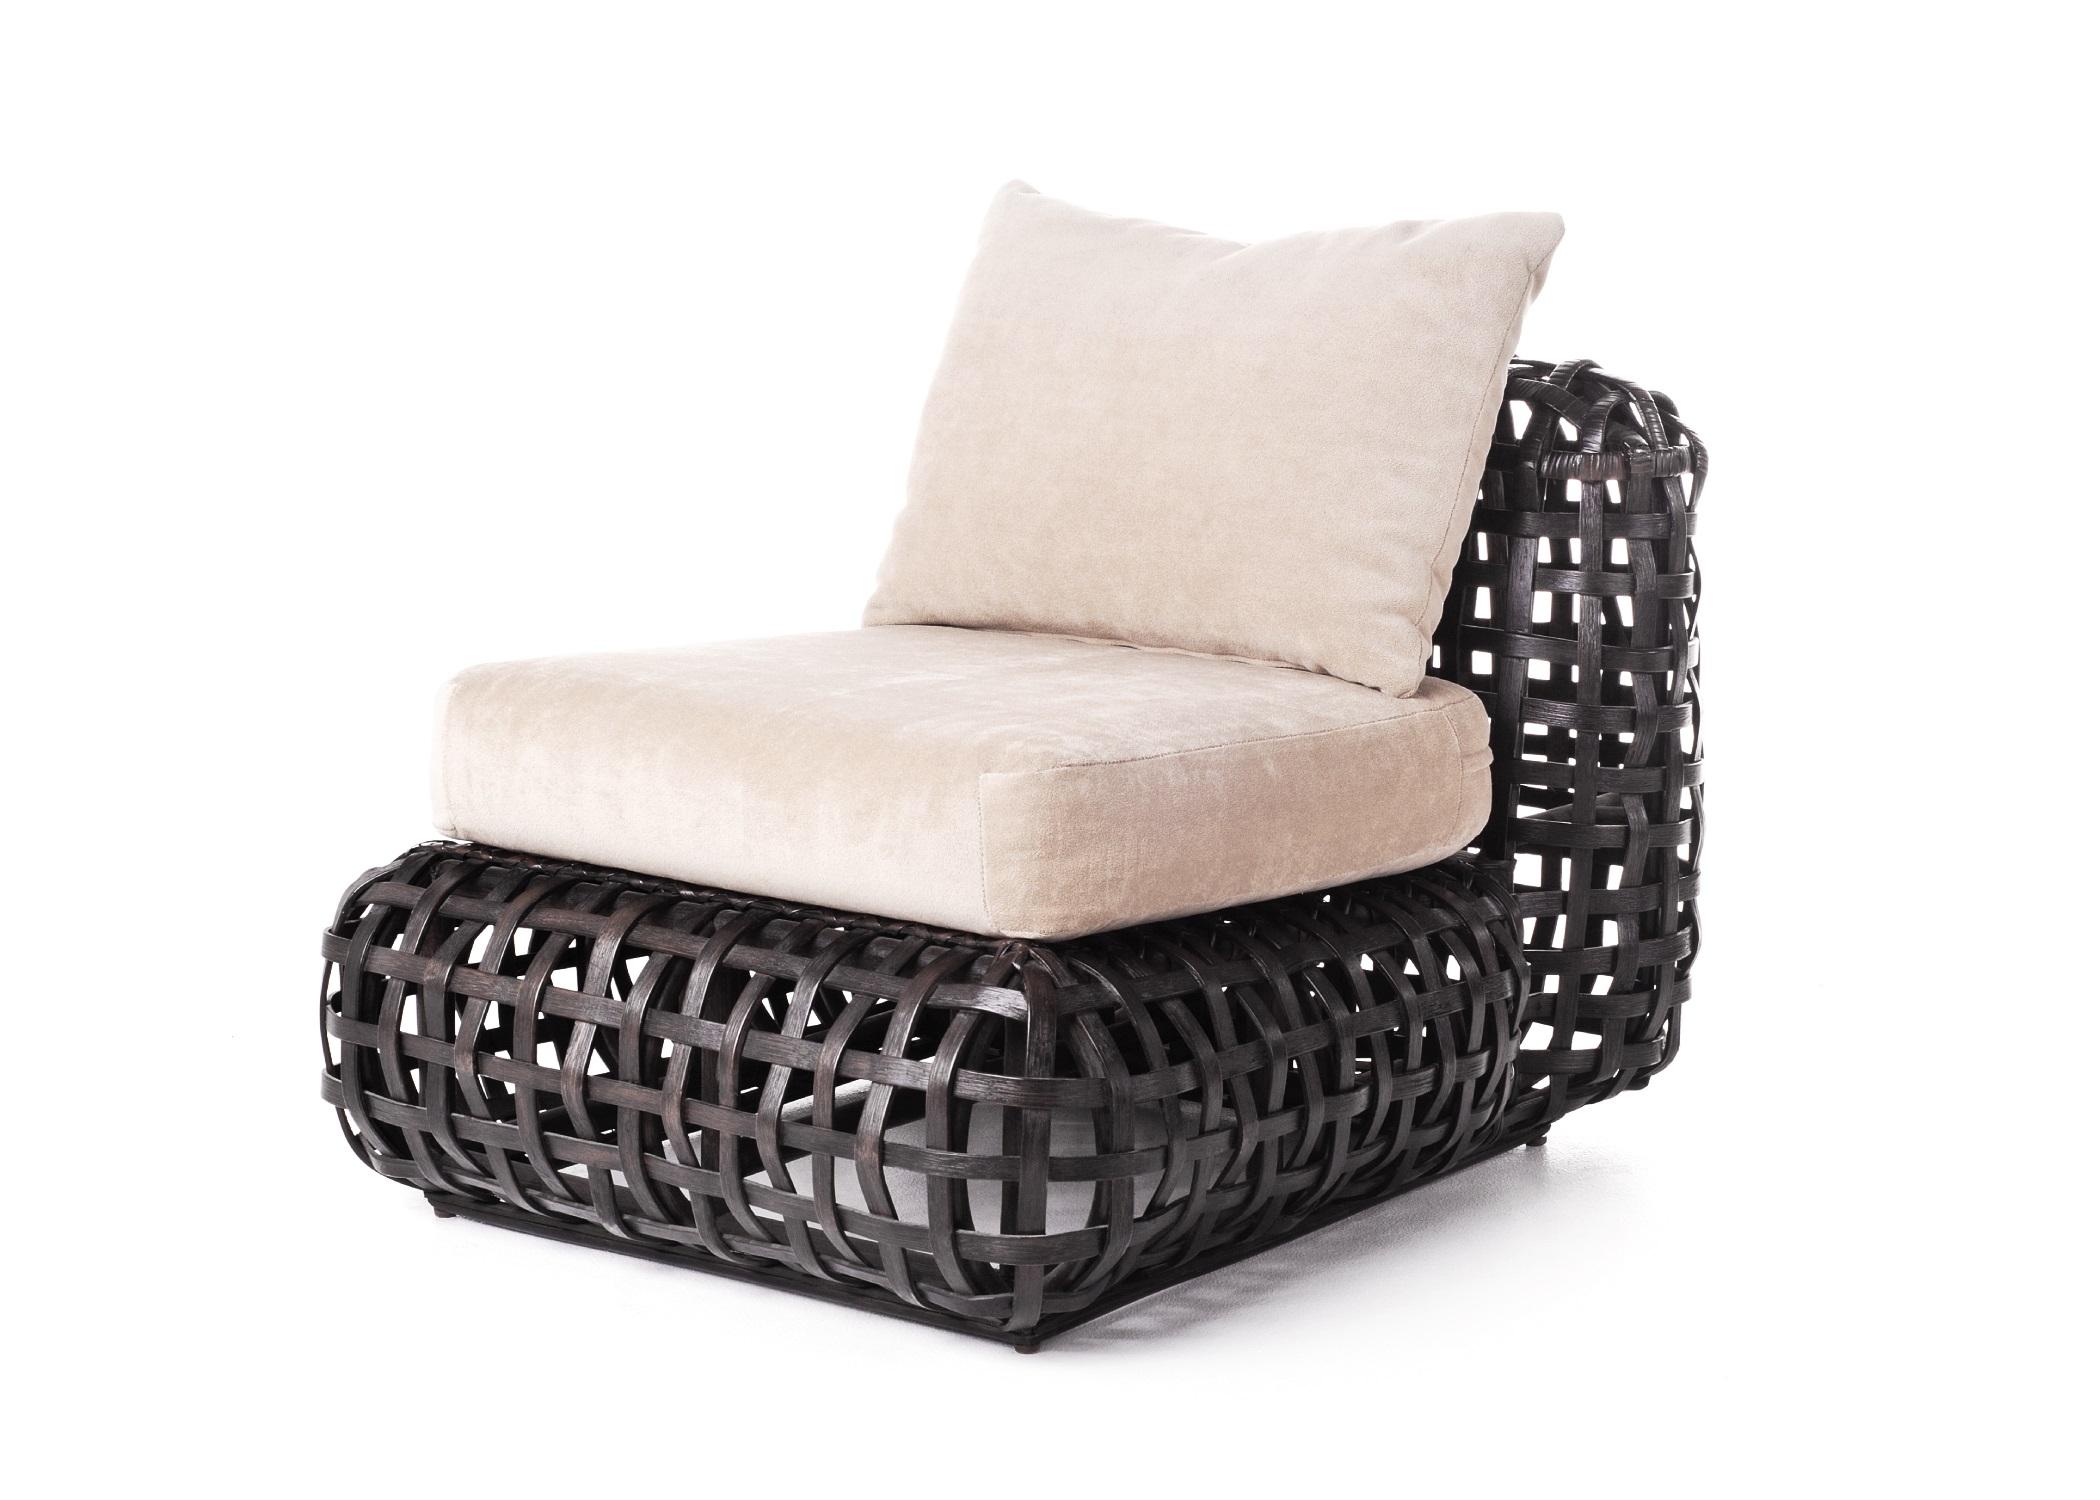 Indoor matilda easy chair by Kenneth Cobonpue.
Materials: Rattan.
Also available in other colors and for outdoors.
Dimensions: 100cm x 81cm x H 63cm.

The same principle of a woven basket is used in making Matilda. This vast collection of